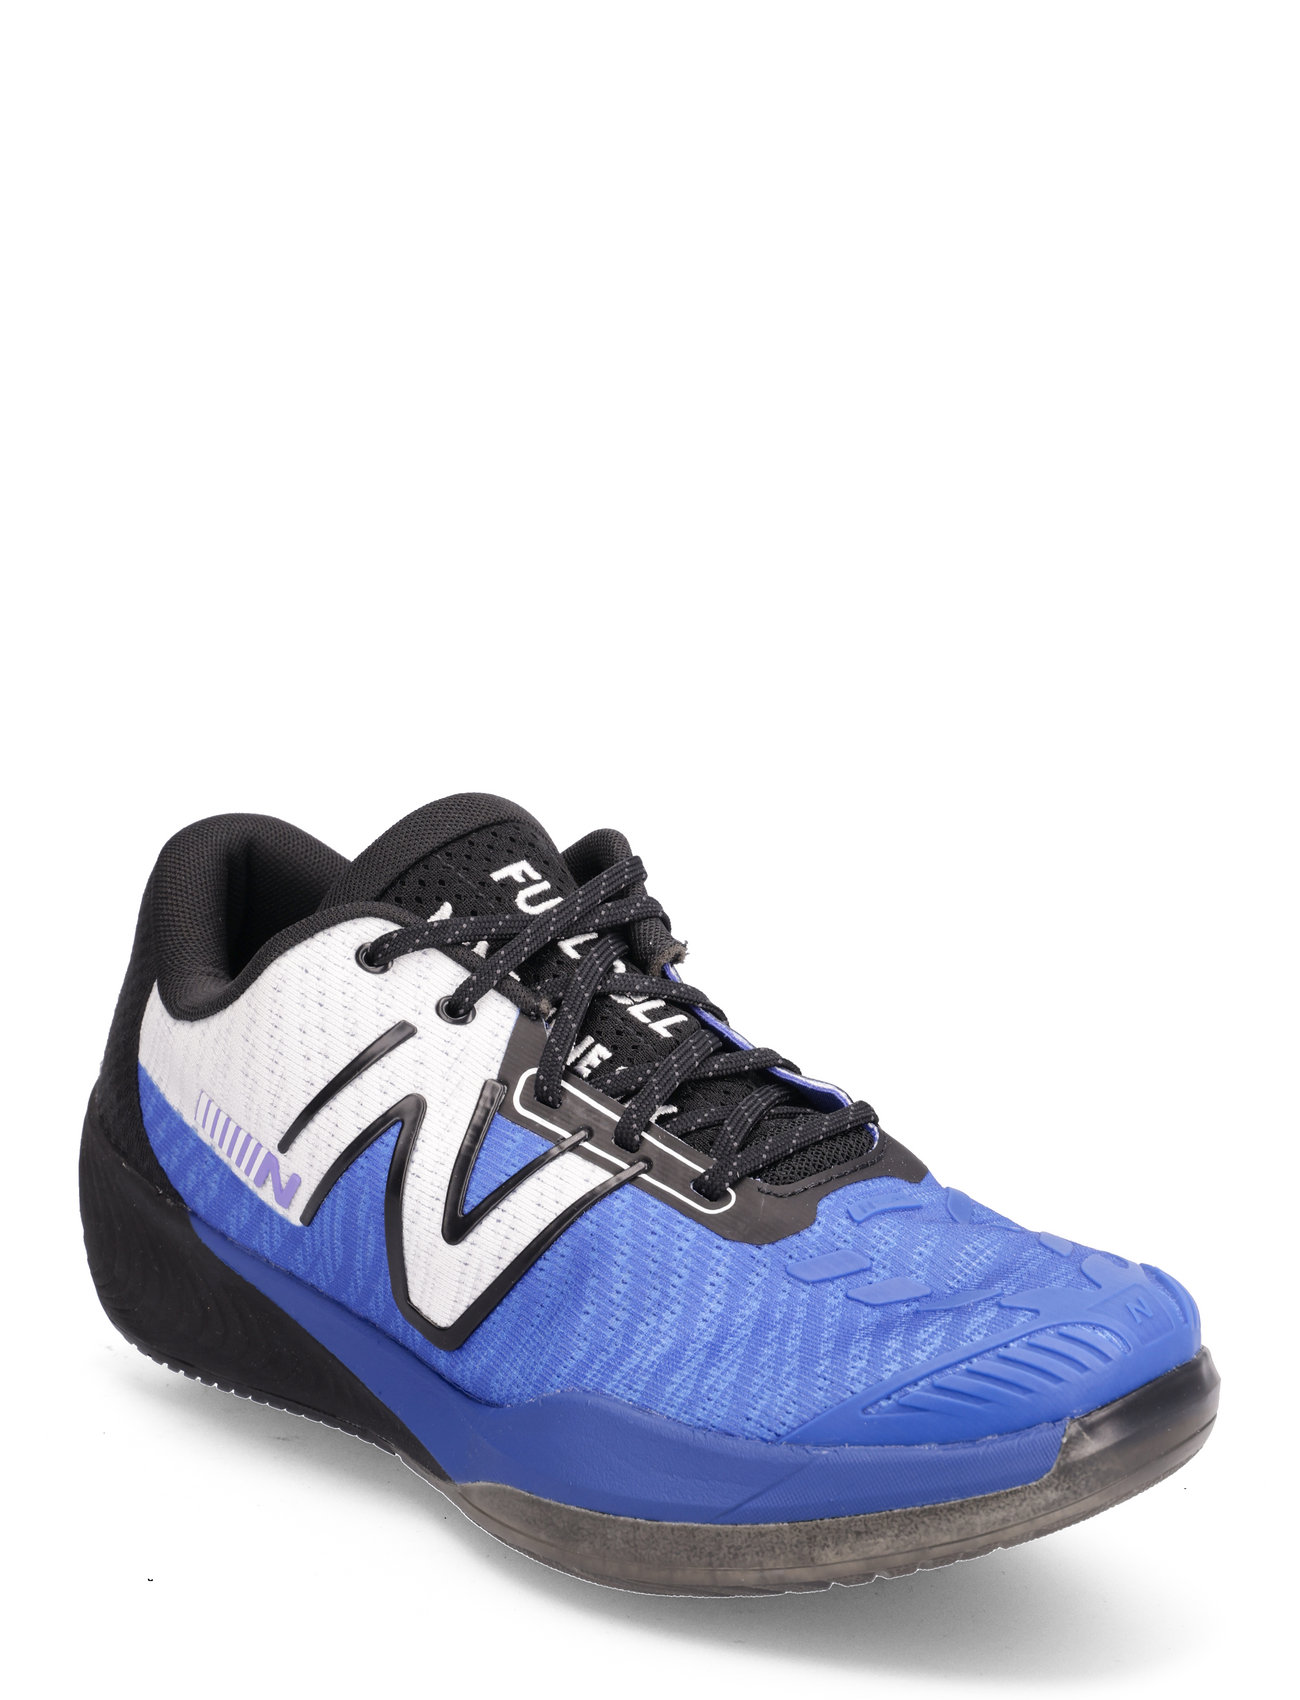 Fuelcell 996V5 Sport Sport Shoes Racketsports Shoes Tennis Shoes Blue New Balance